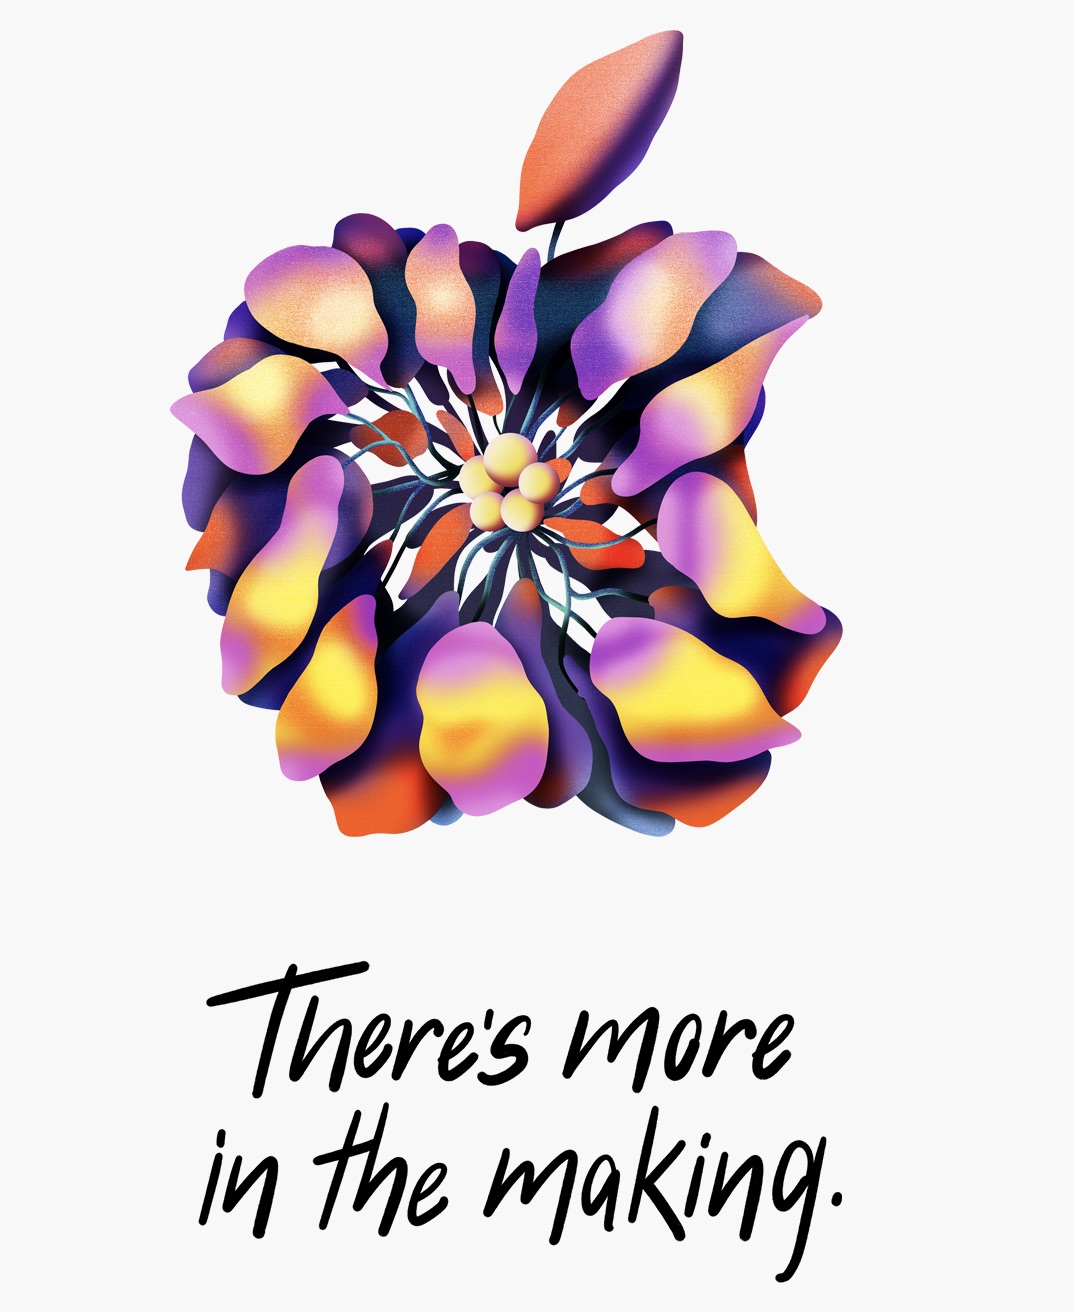 Apple Announces Special Event on October 30: There&#039;s More in the Making